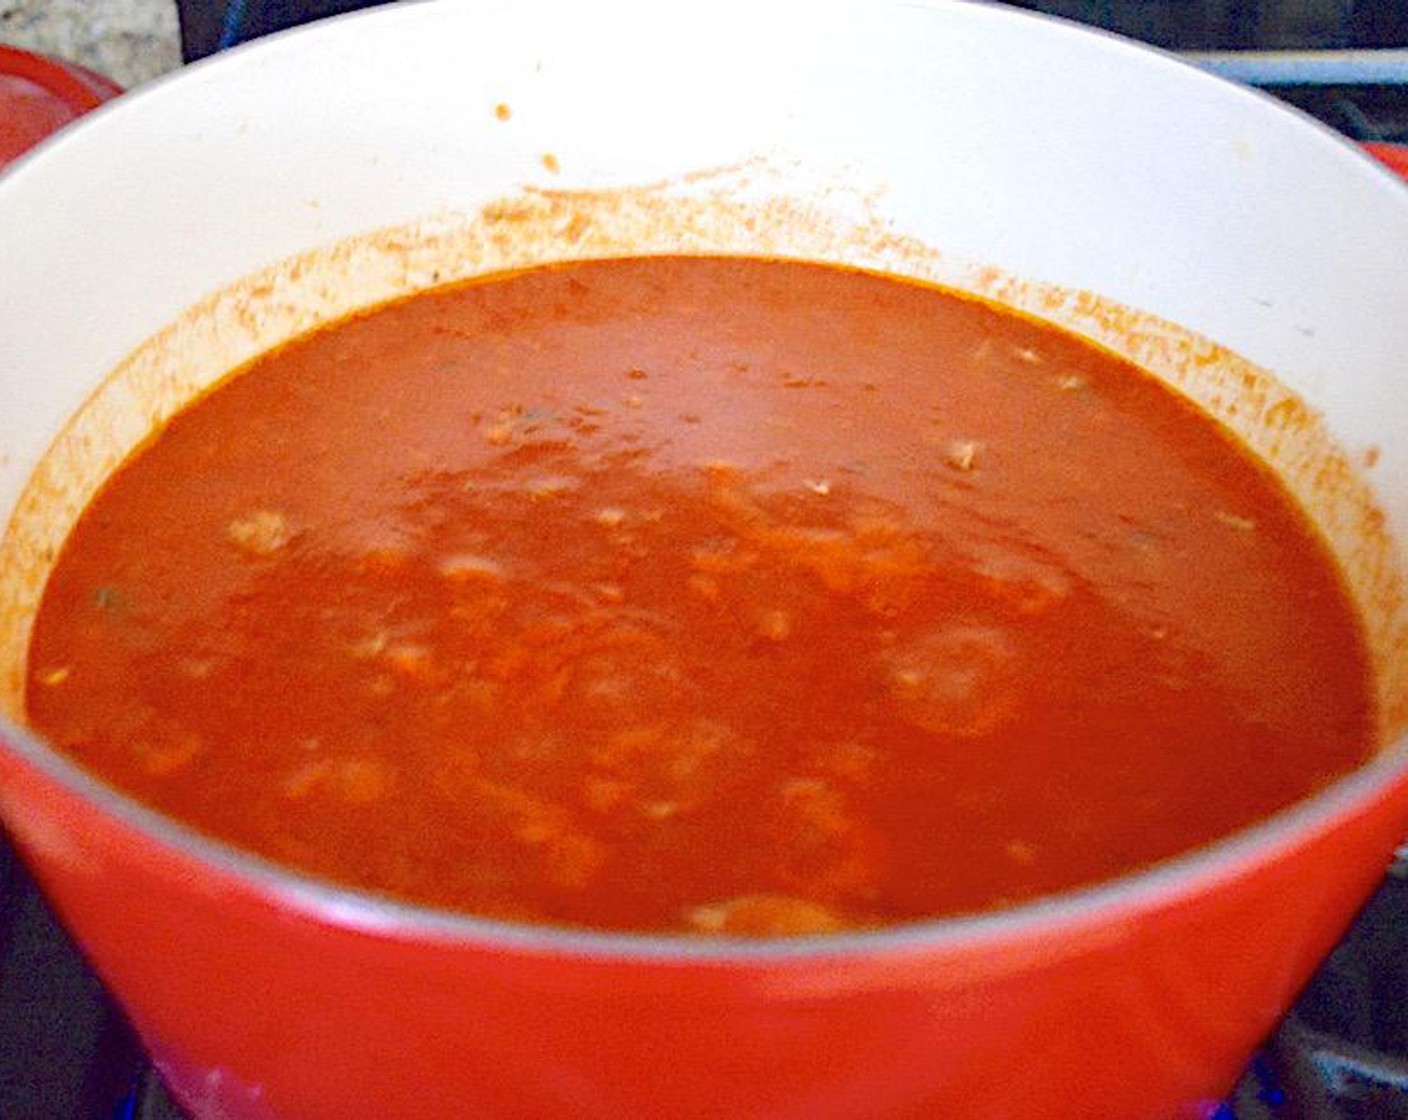 step 4 Then pour in the Marinara Sauce (1 jar), Crushed Tomatoes (1 can), and Chicken Stock (2 cups). Bring the soup to a gentle boil, then reduce it to a simmer. Let it cook for 30 minutes.